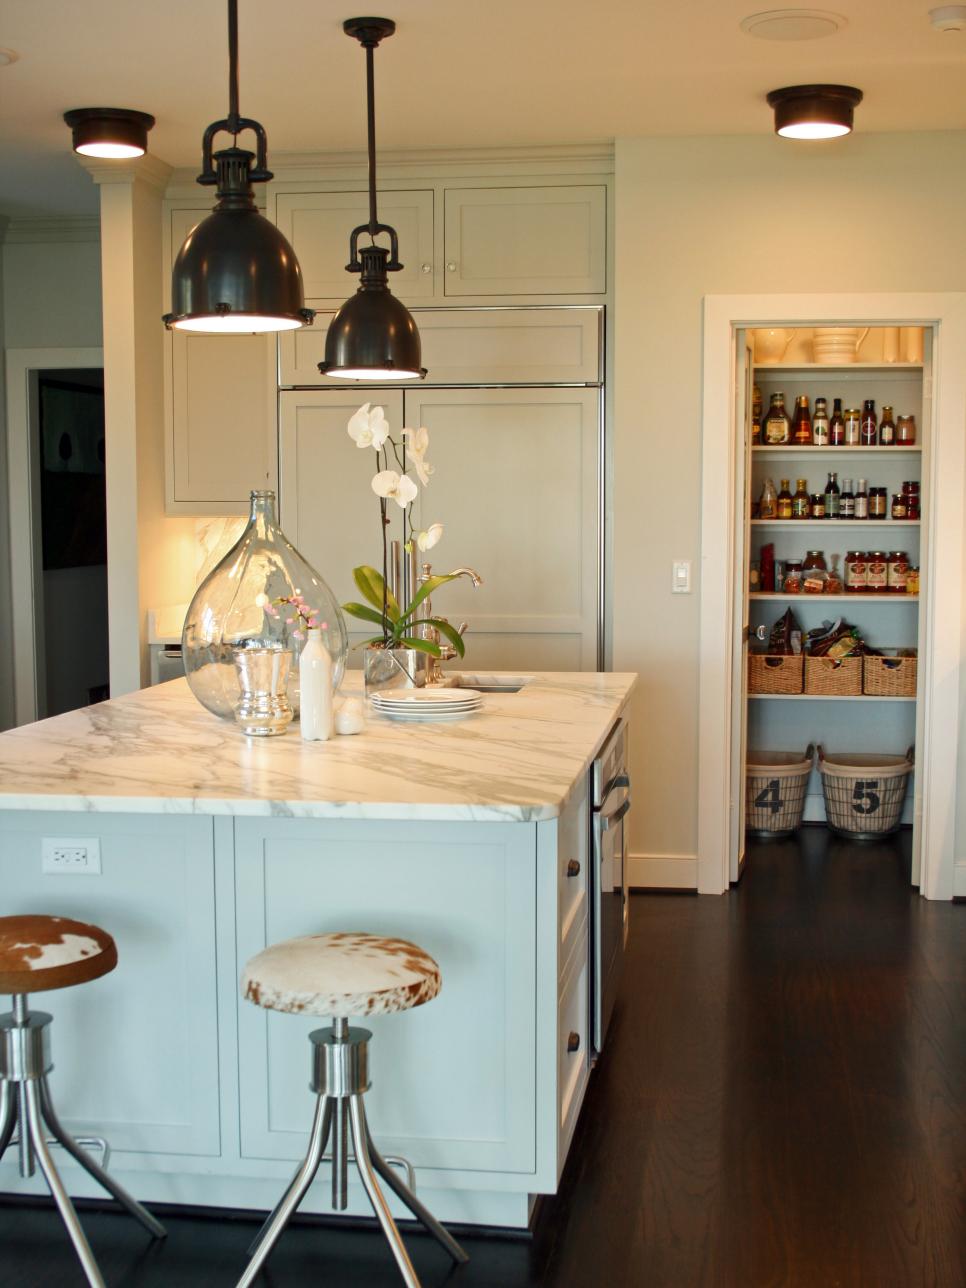 White Contemporary Kitchen Island With Industrial Pendants | HGTV